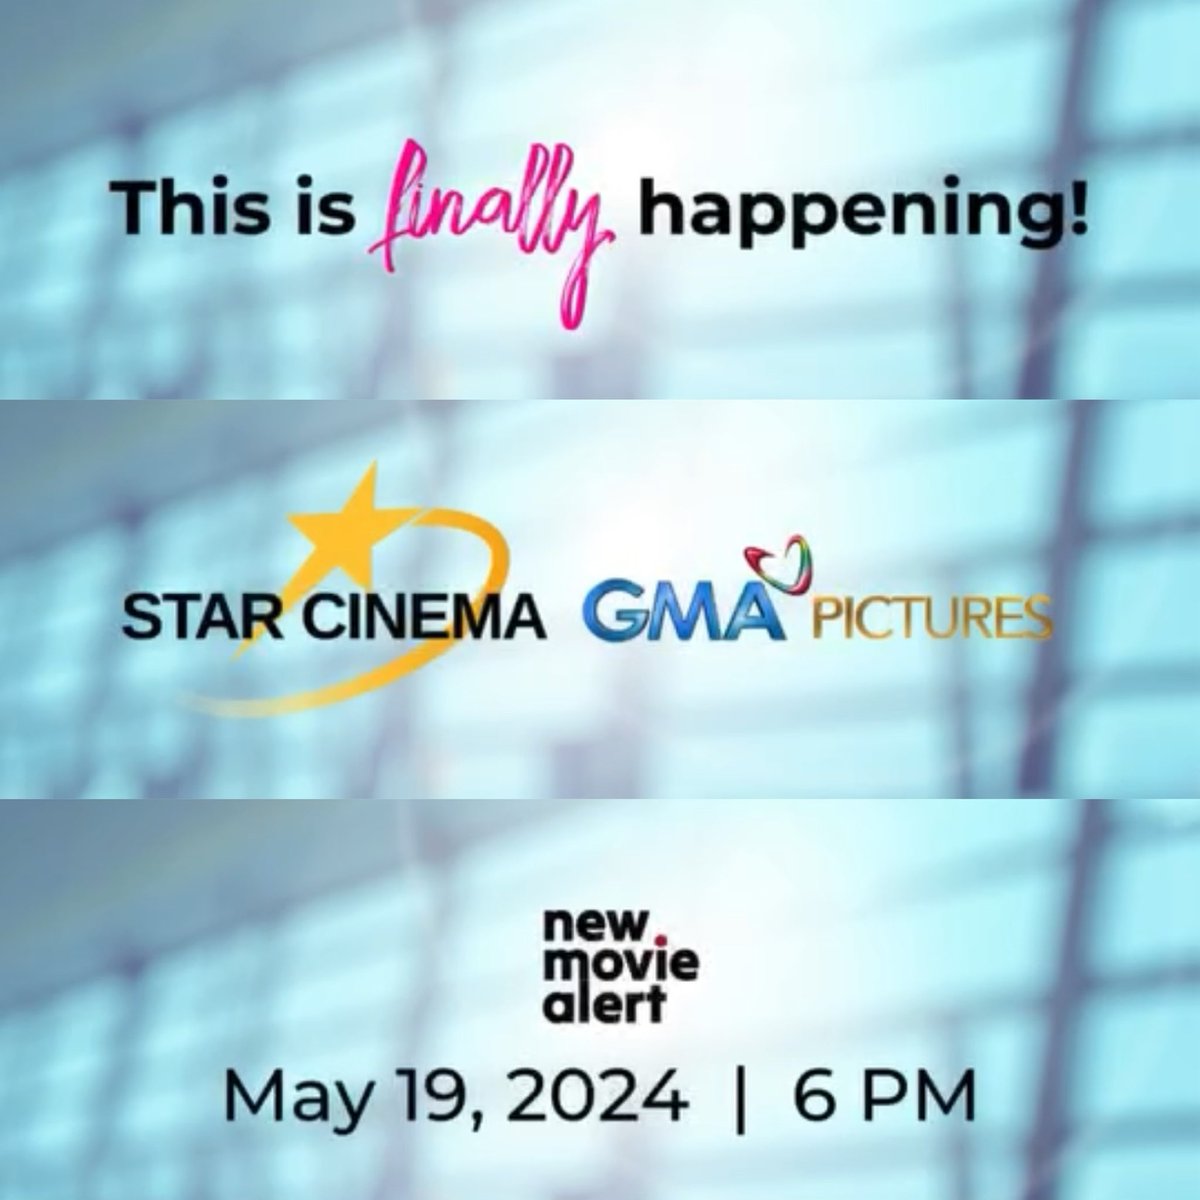 This is FINALLY happening! STAR CINEMA x gma pictures! ❤️

#MegaKapamilya